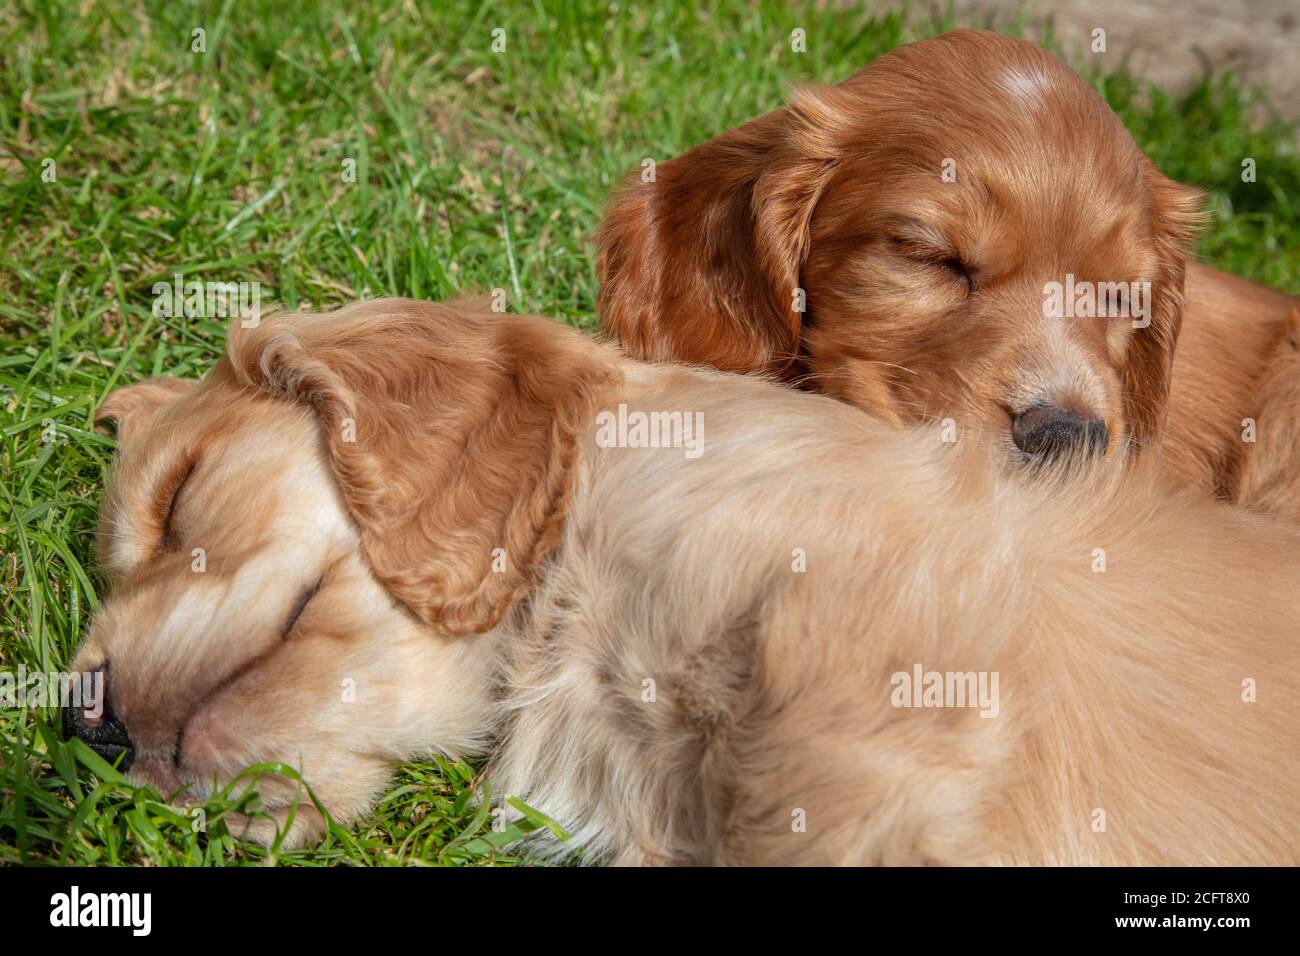 Cute brown puppy dogs sleeping in sunshine on grass Stock Photo